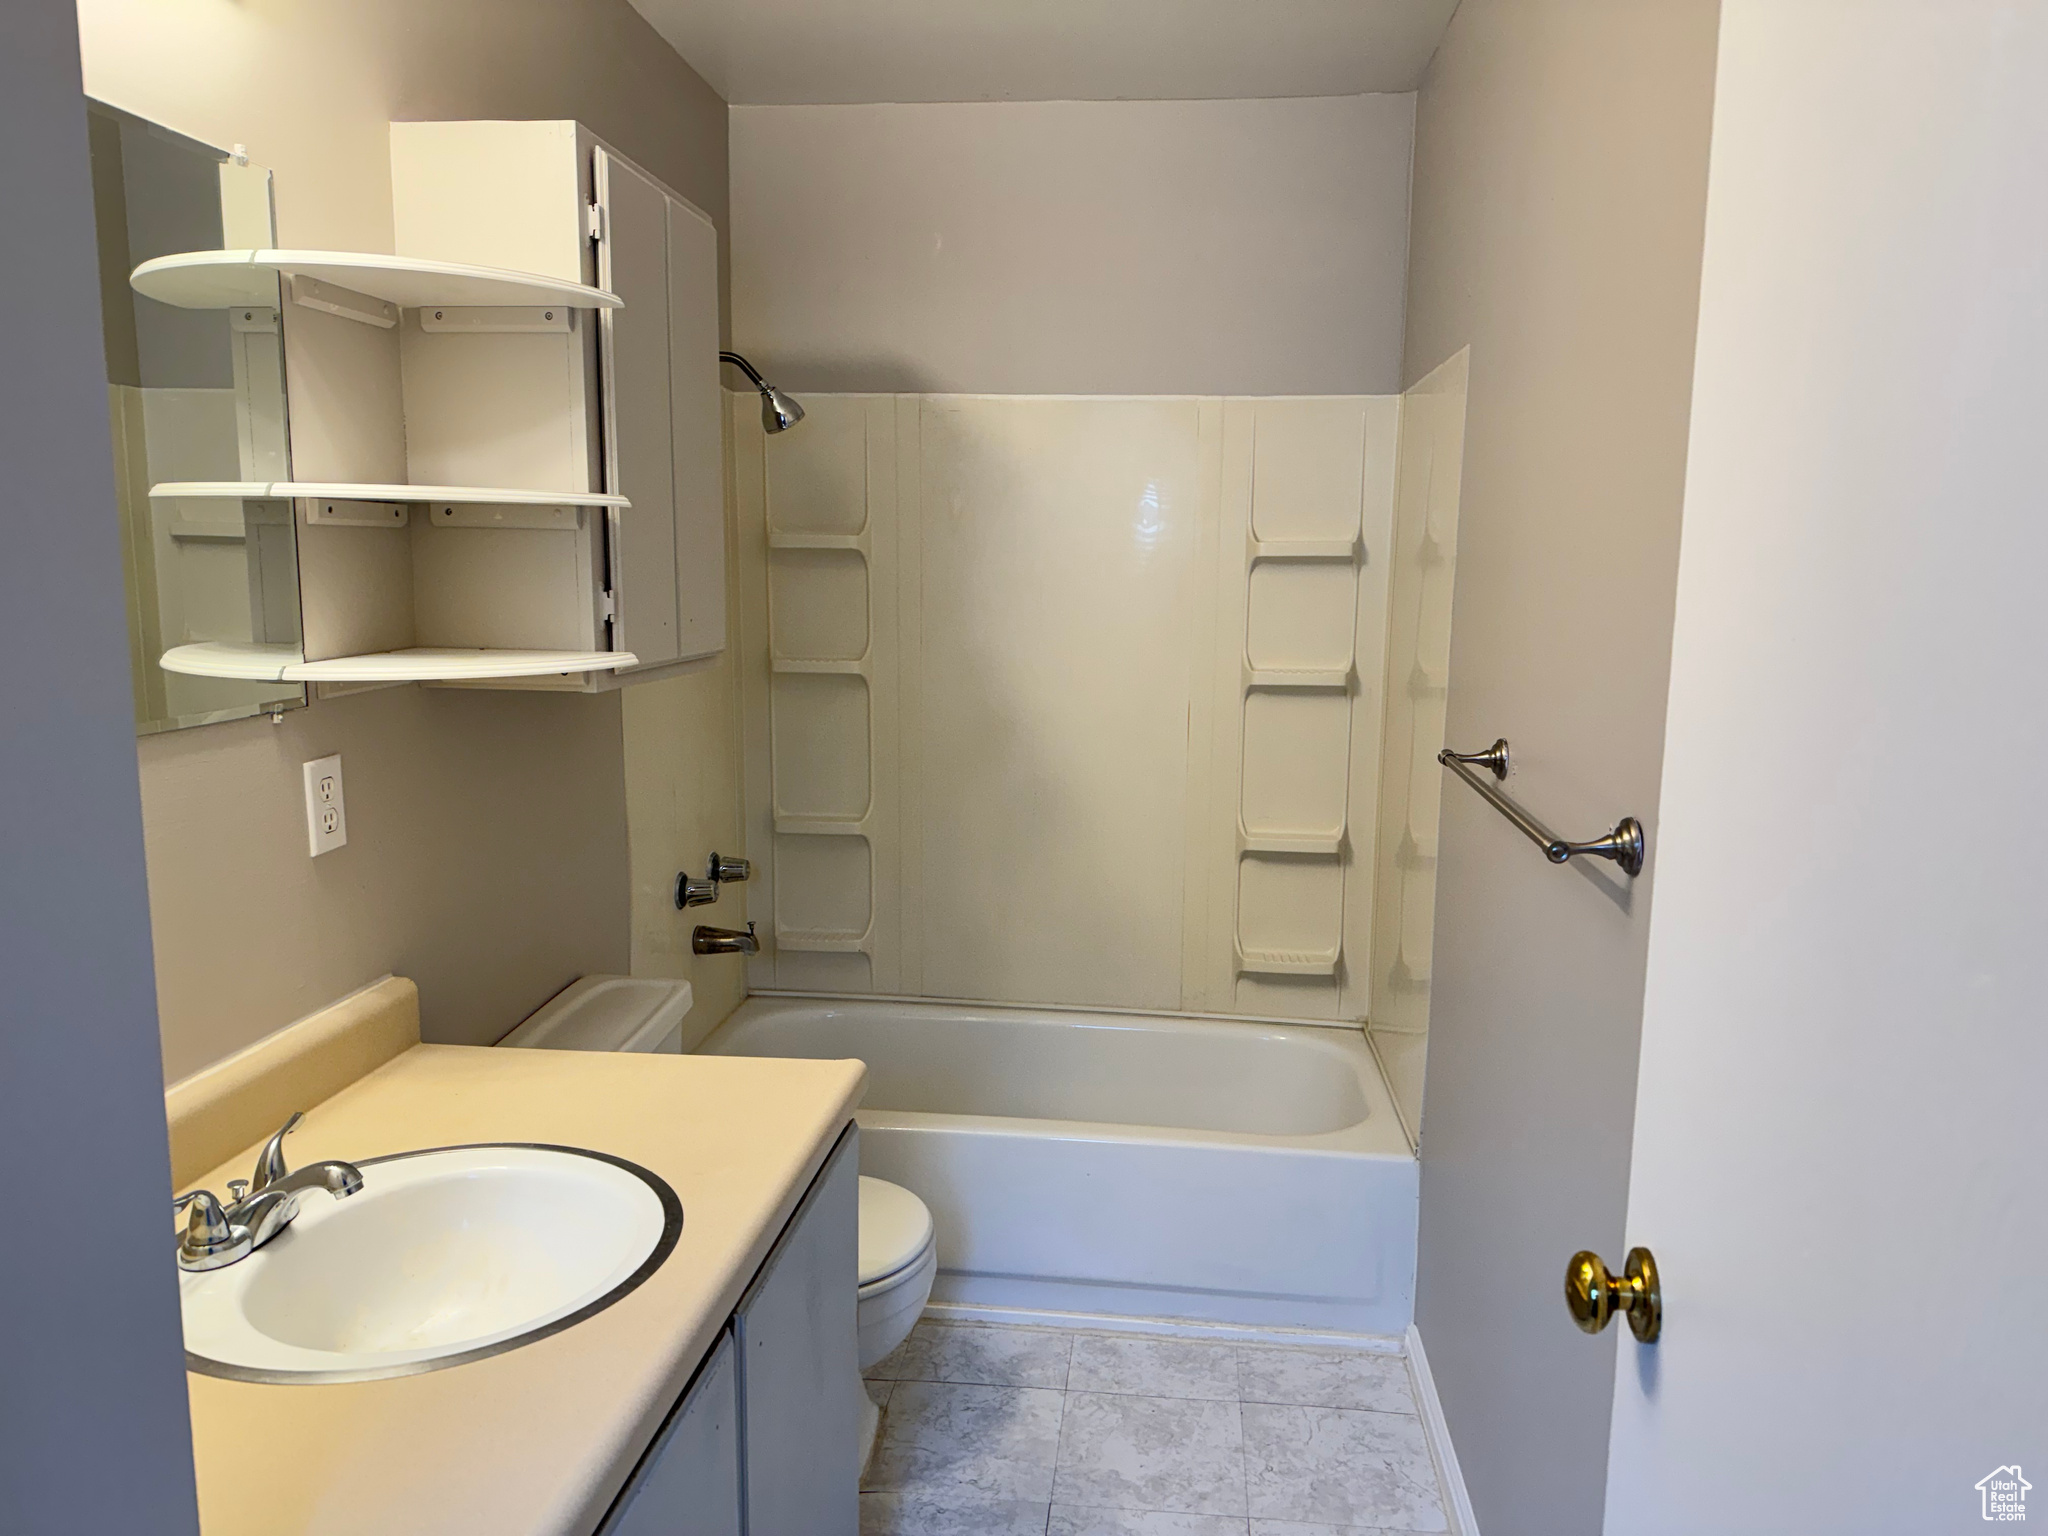 Full bathroom with tile floors, toilet, tub / shower combination, and large vanity